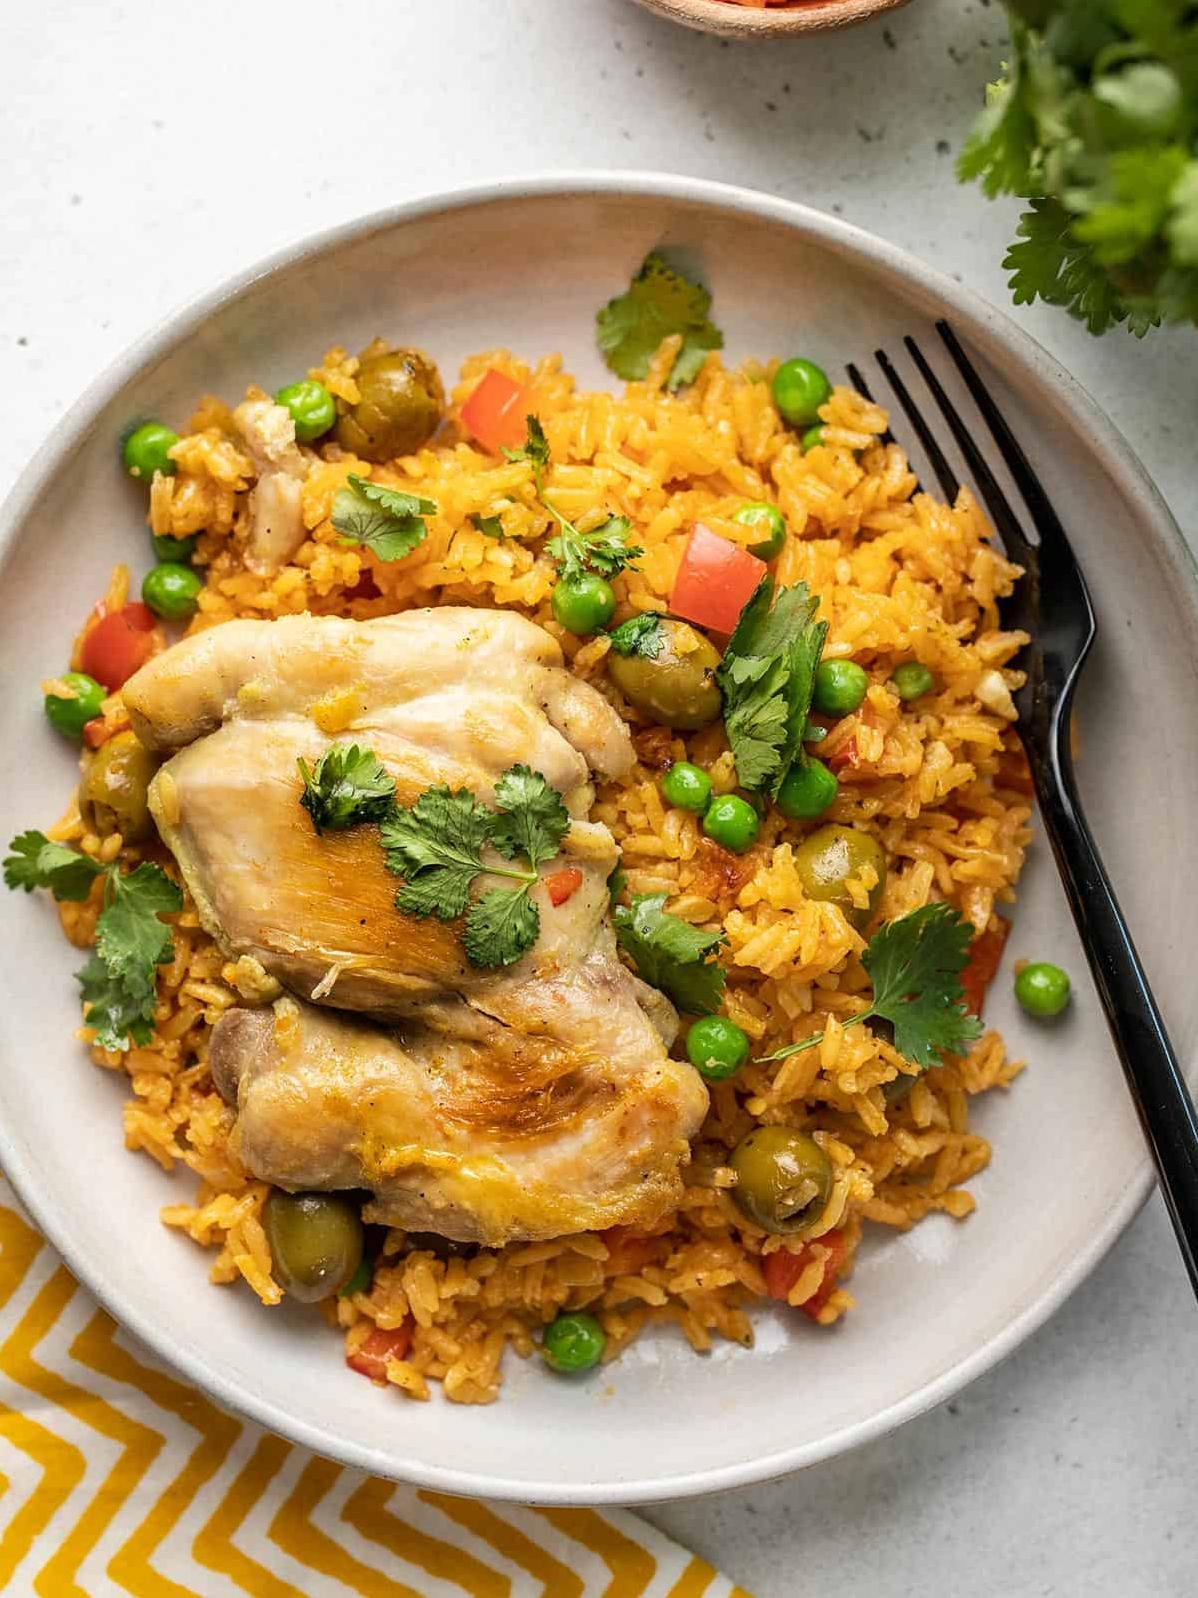  You can't go wrong with tender chicken and savory beans over a bed of fluffy rice.